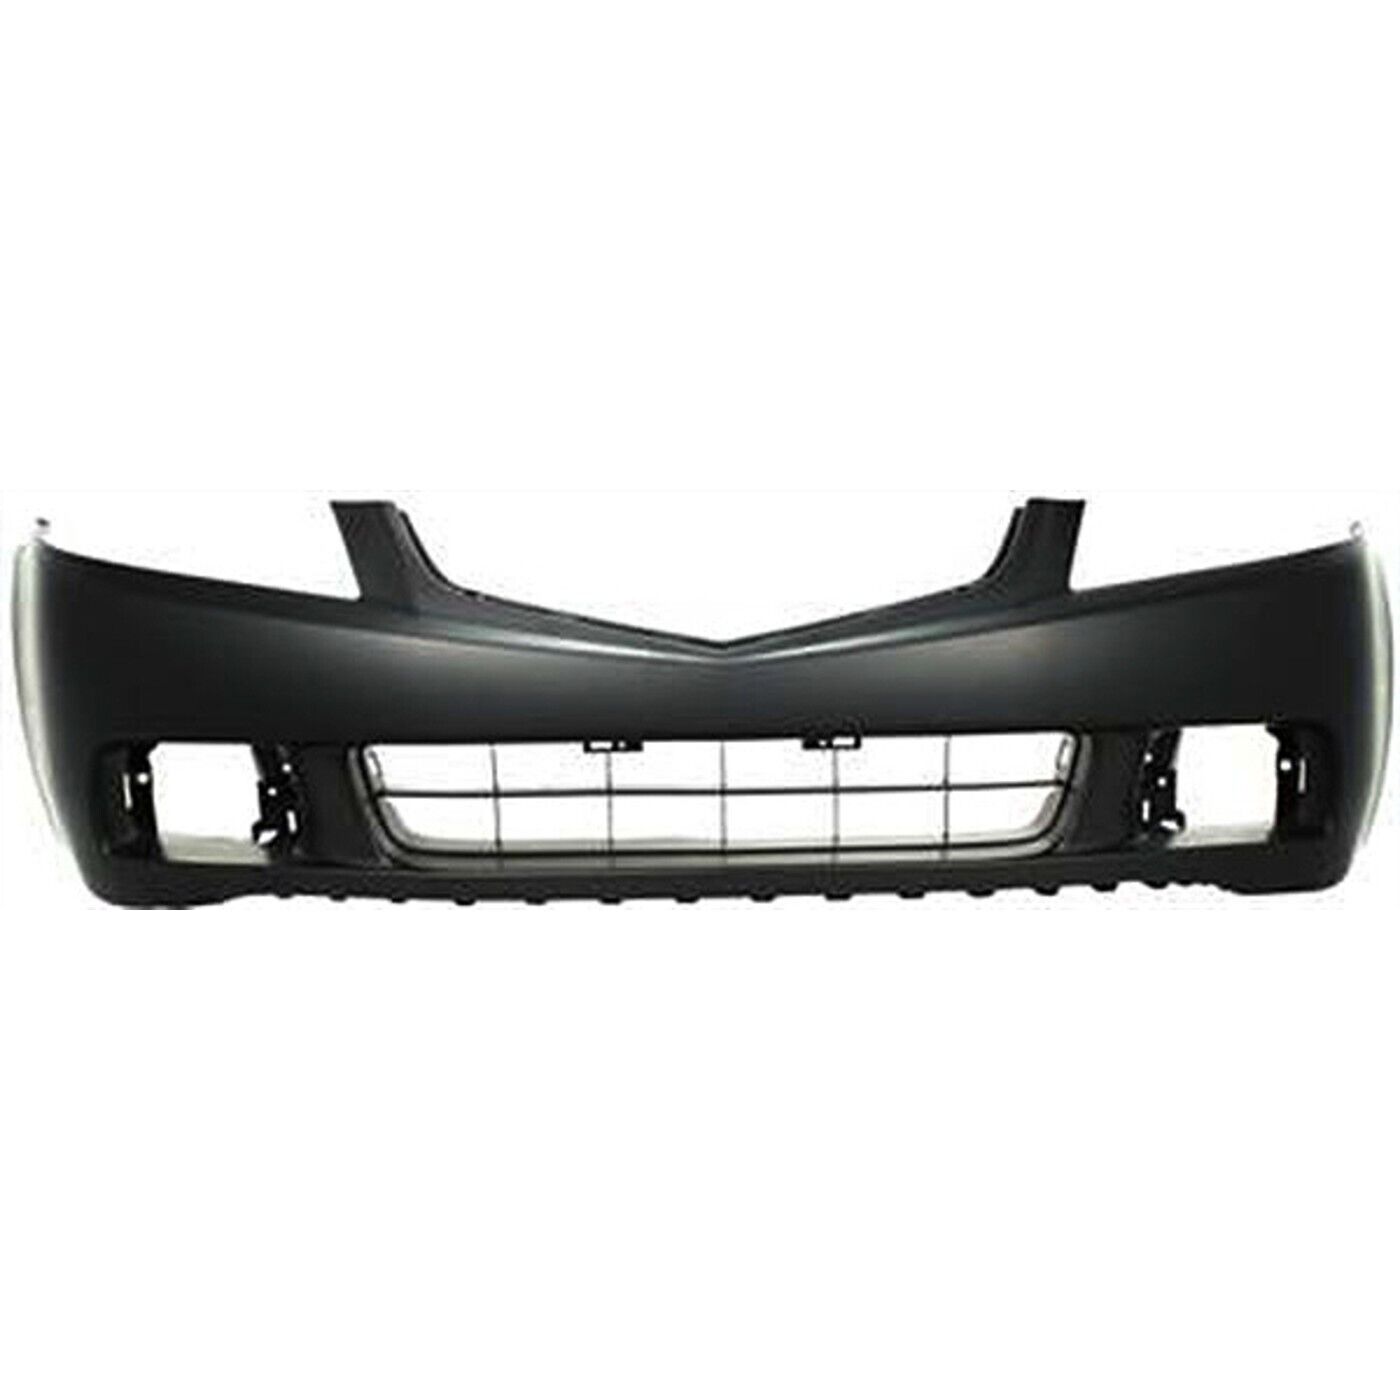 Front Bumper Cover Fascia For 2004 2005 Acura TSX Primed With Fog Light Holes